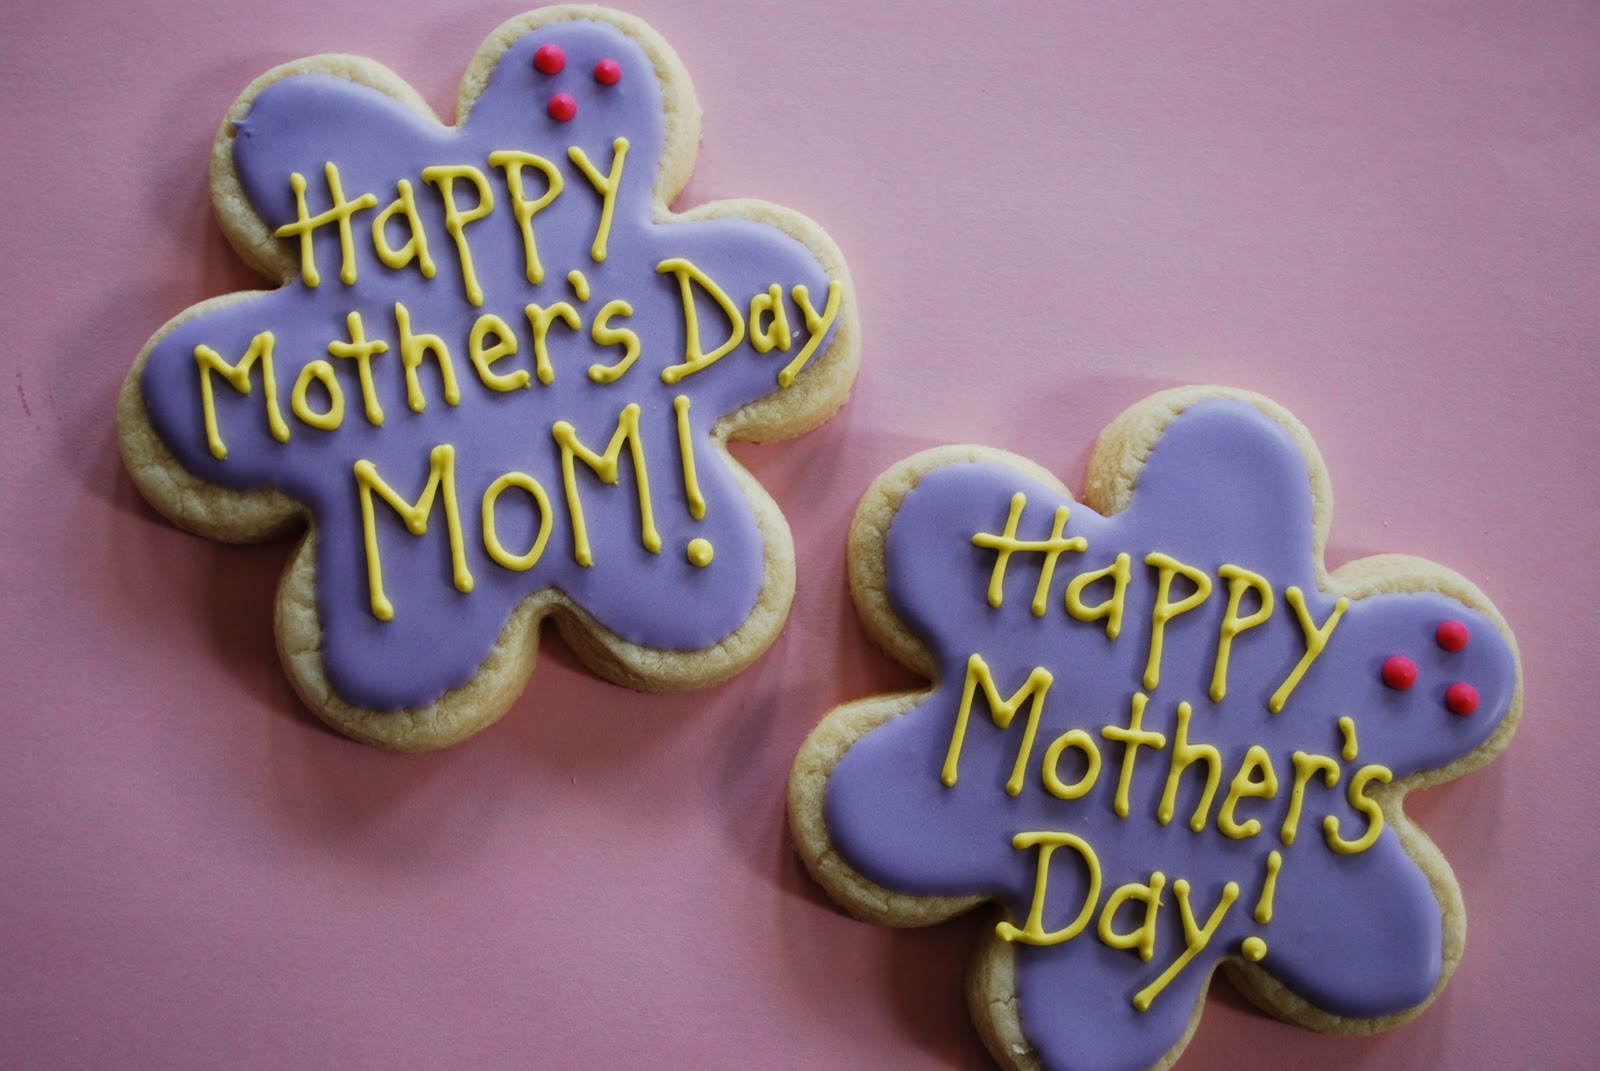 Cool Vibrant Latest Mothers Day Wallpapers Hd Free Photos Download